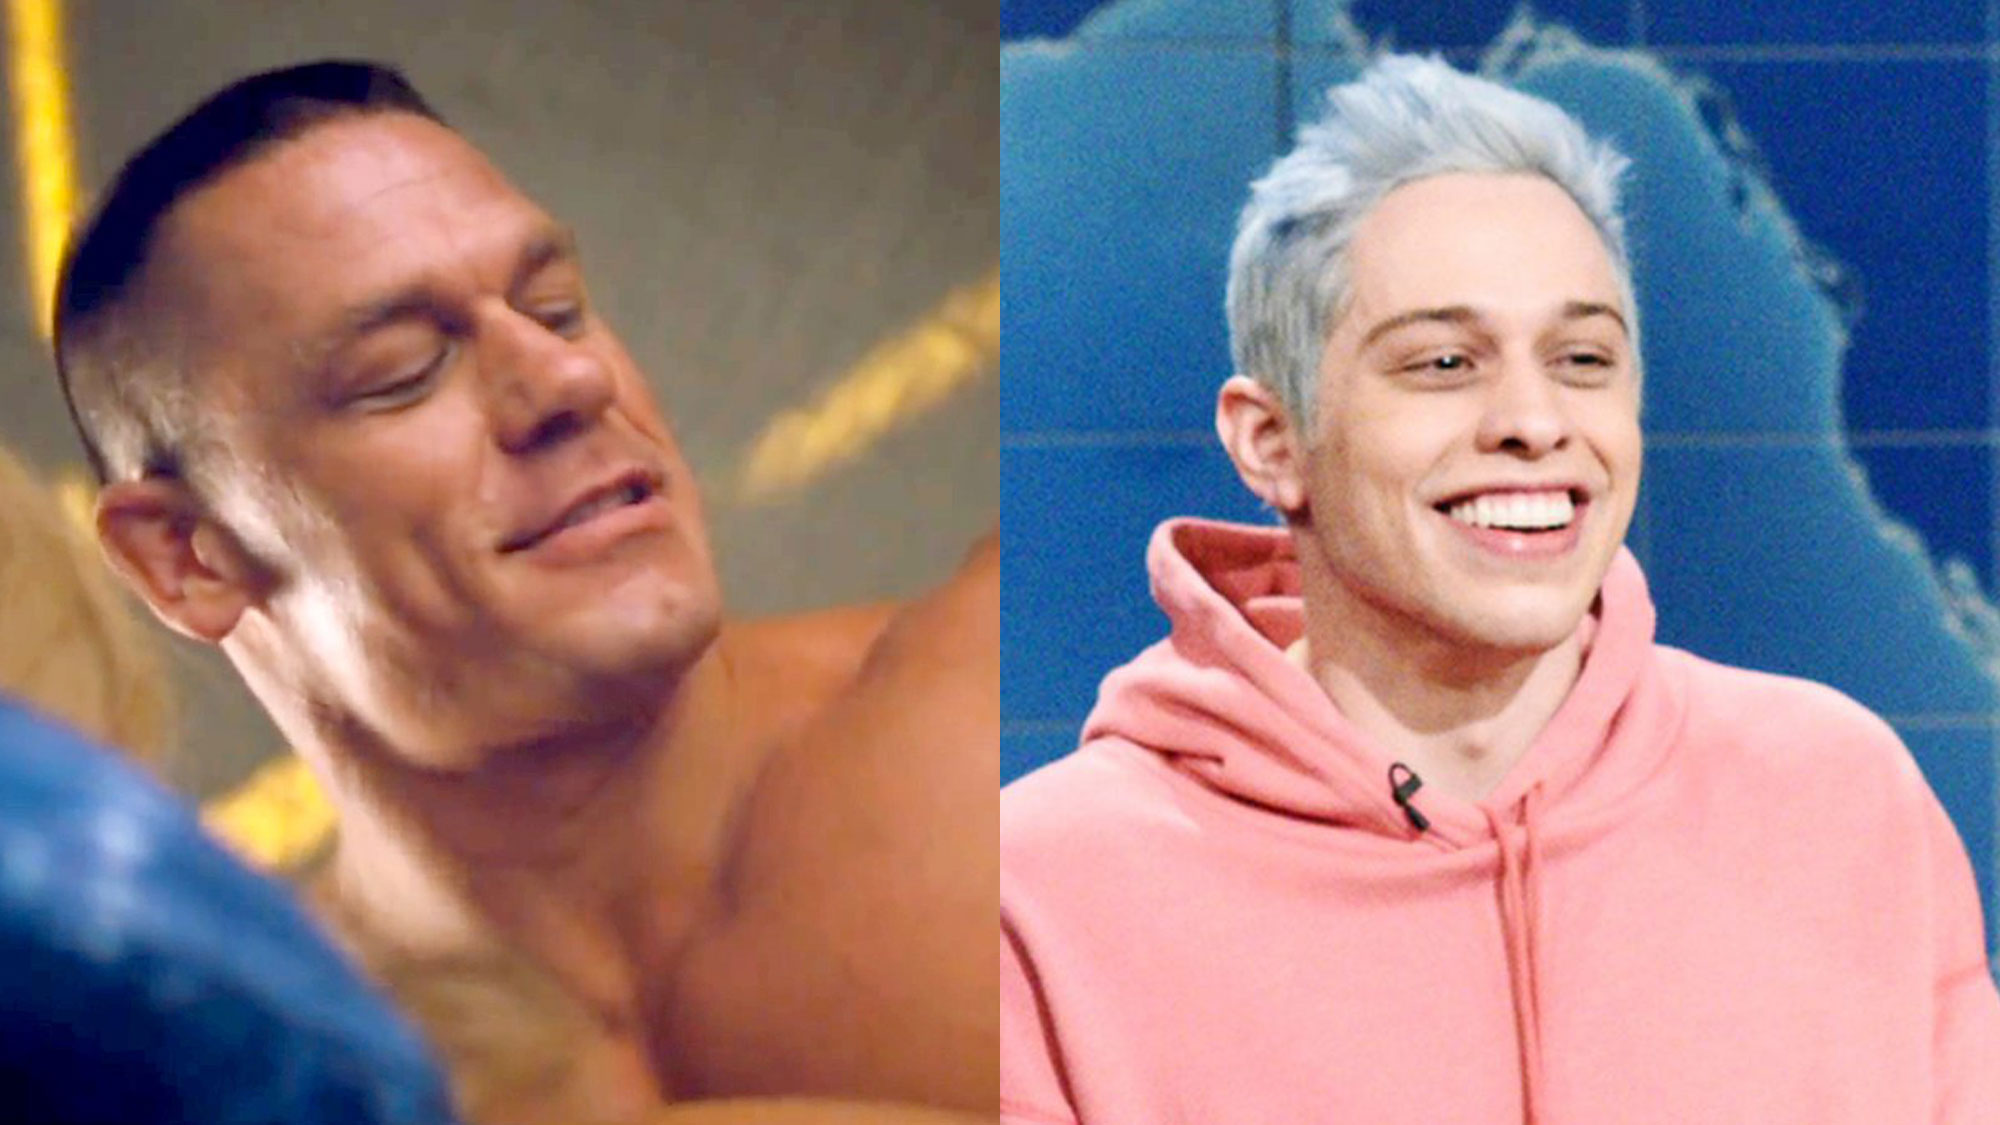 Pete Davidson Says John Cenas Dick Is Huge and His Uncles Are Obsessed With It pic